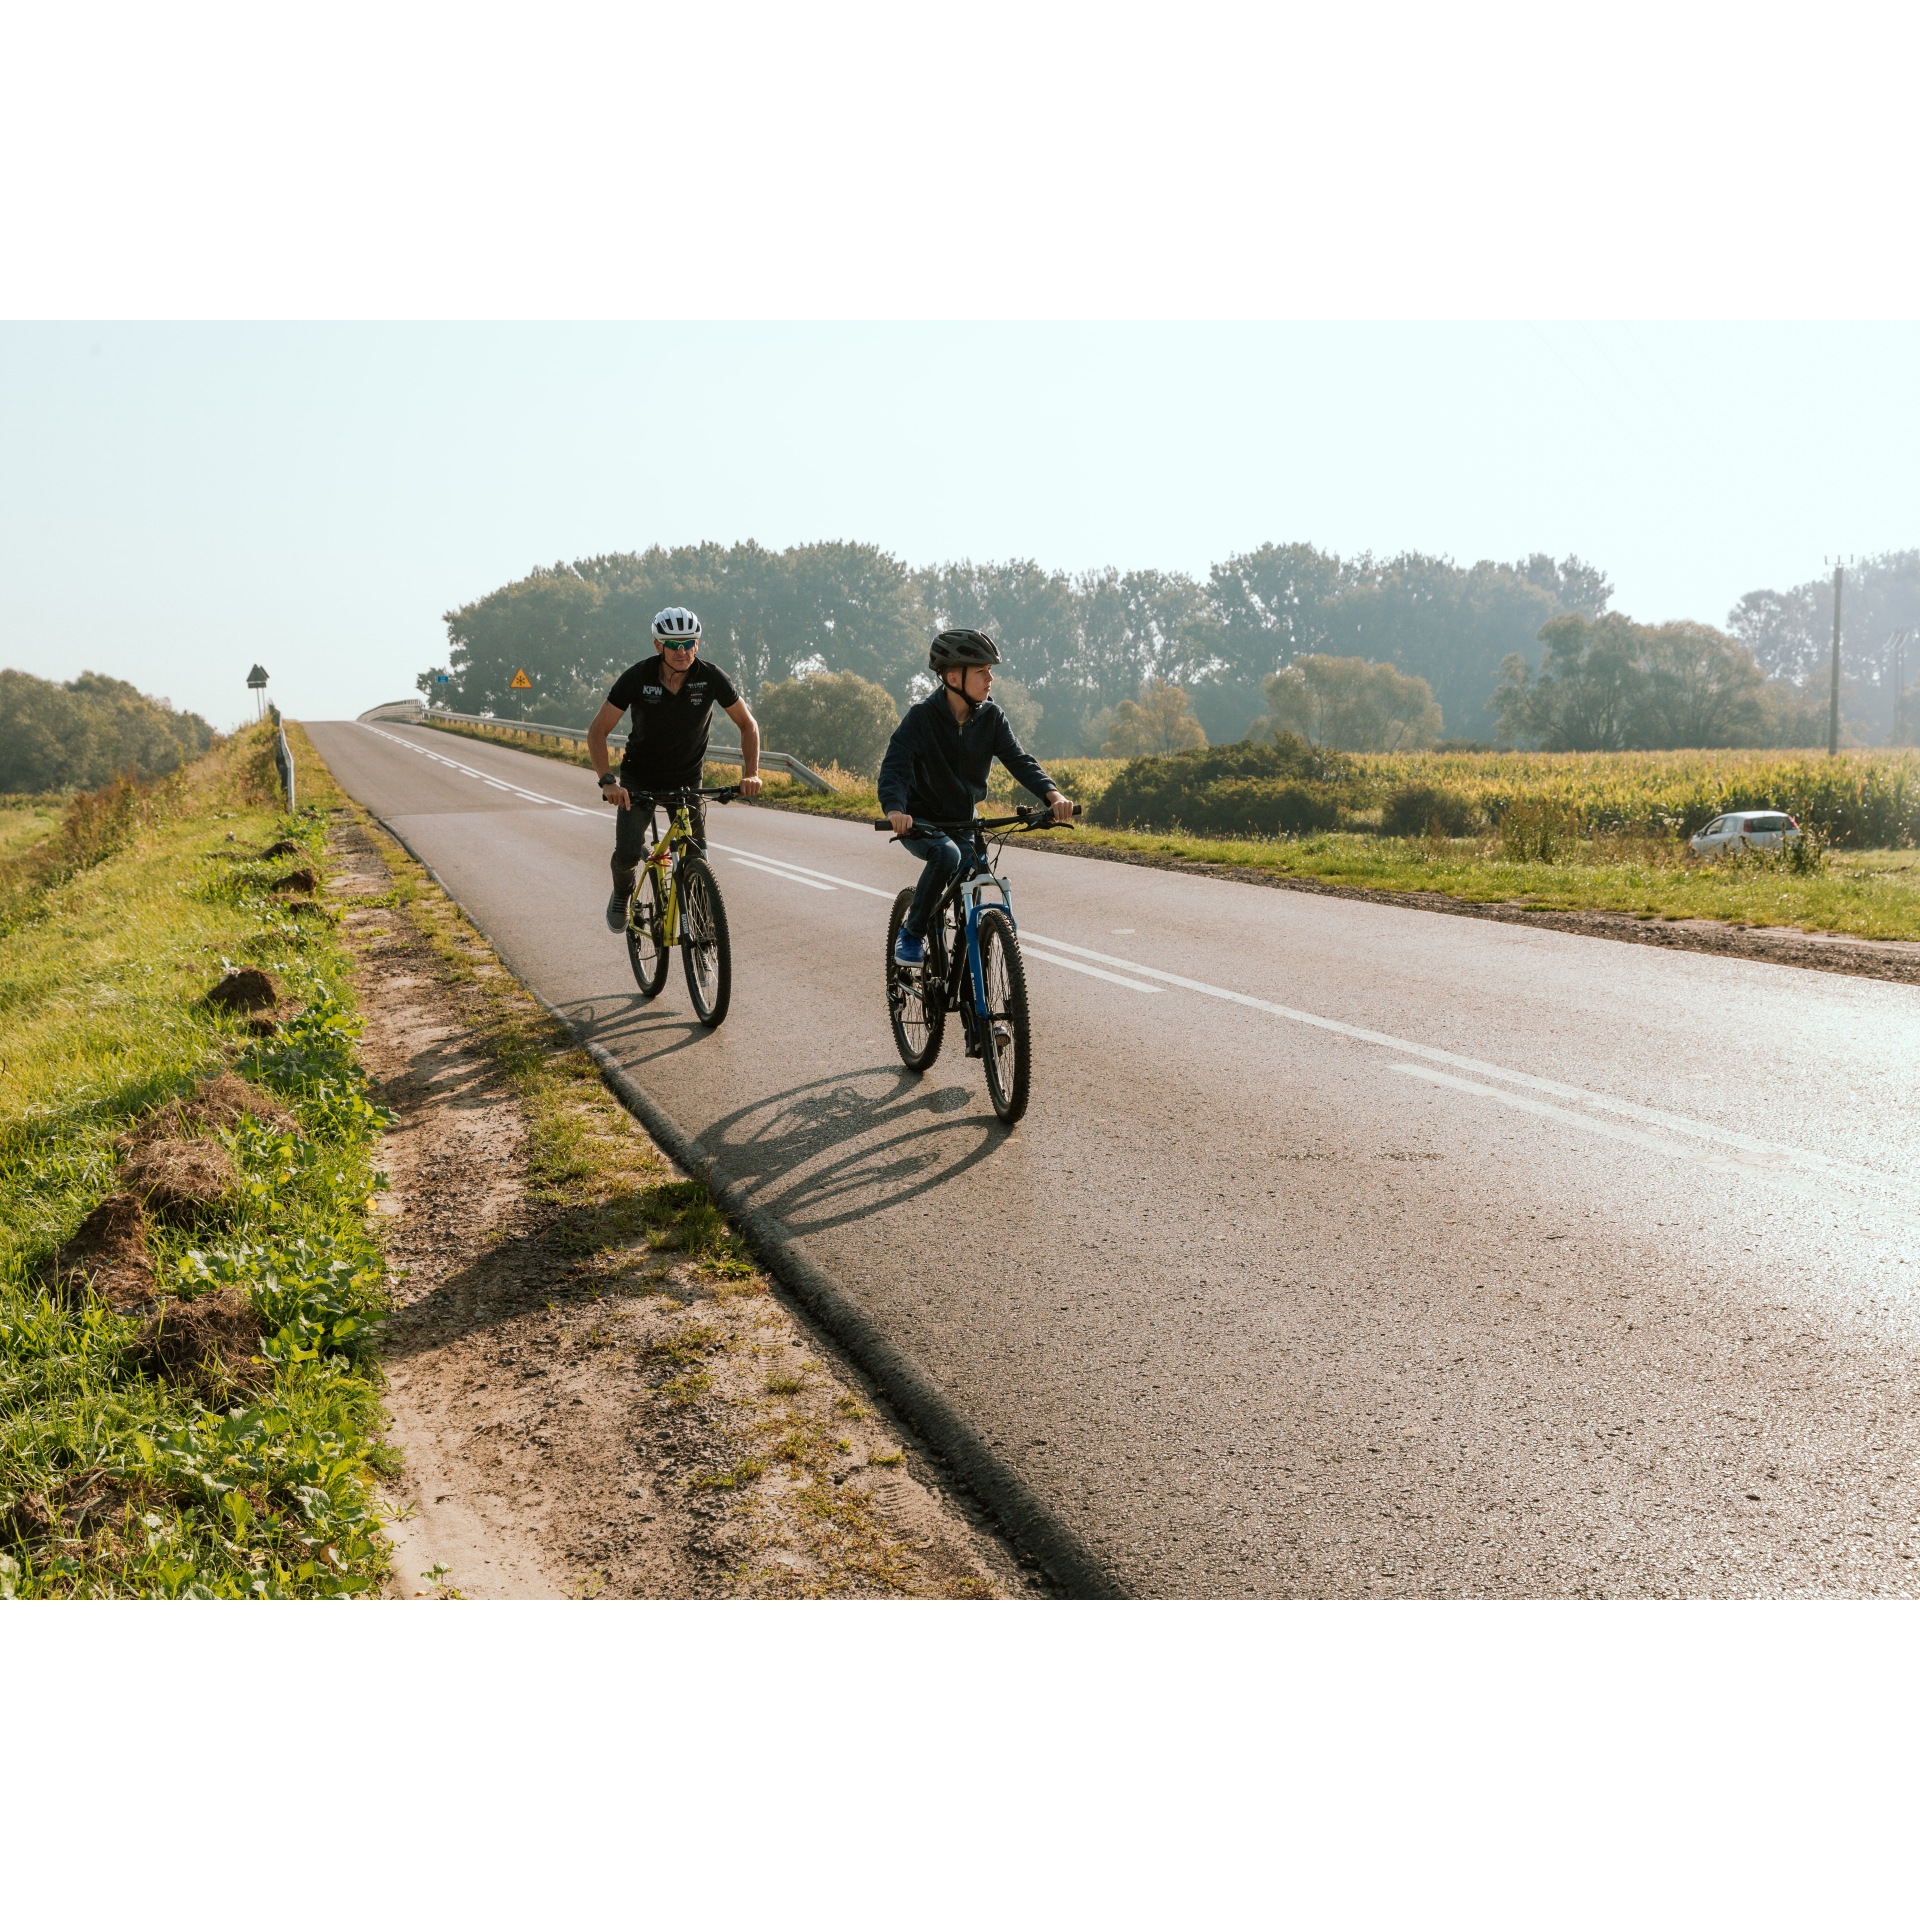 Two cyclists on an asphalt road